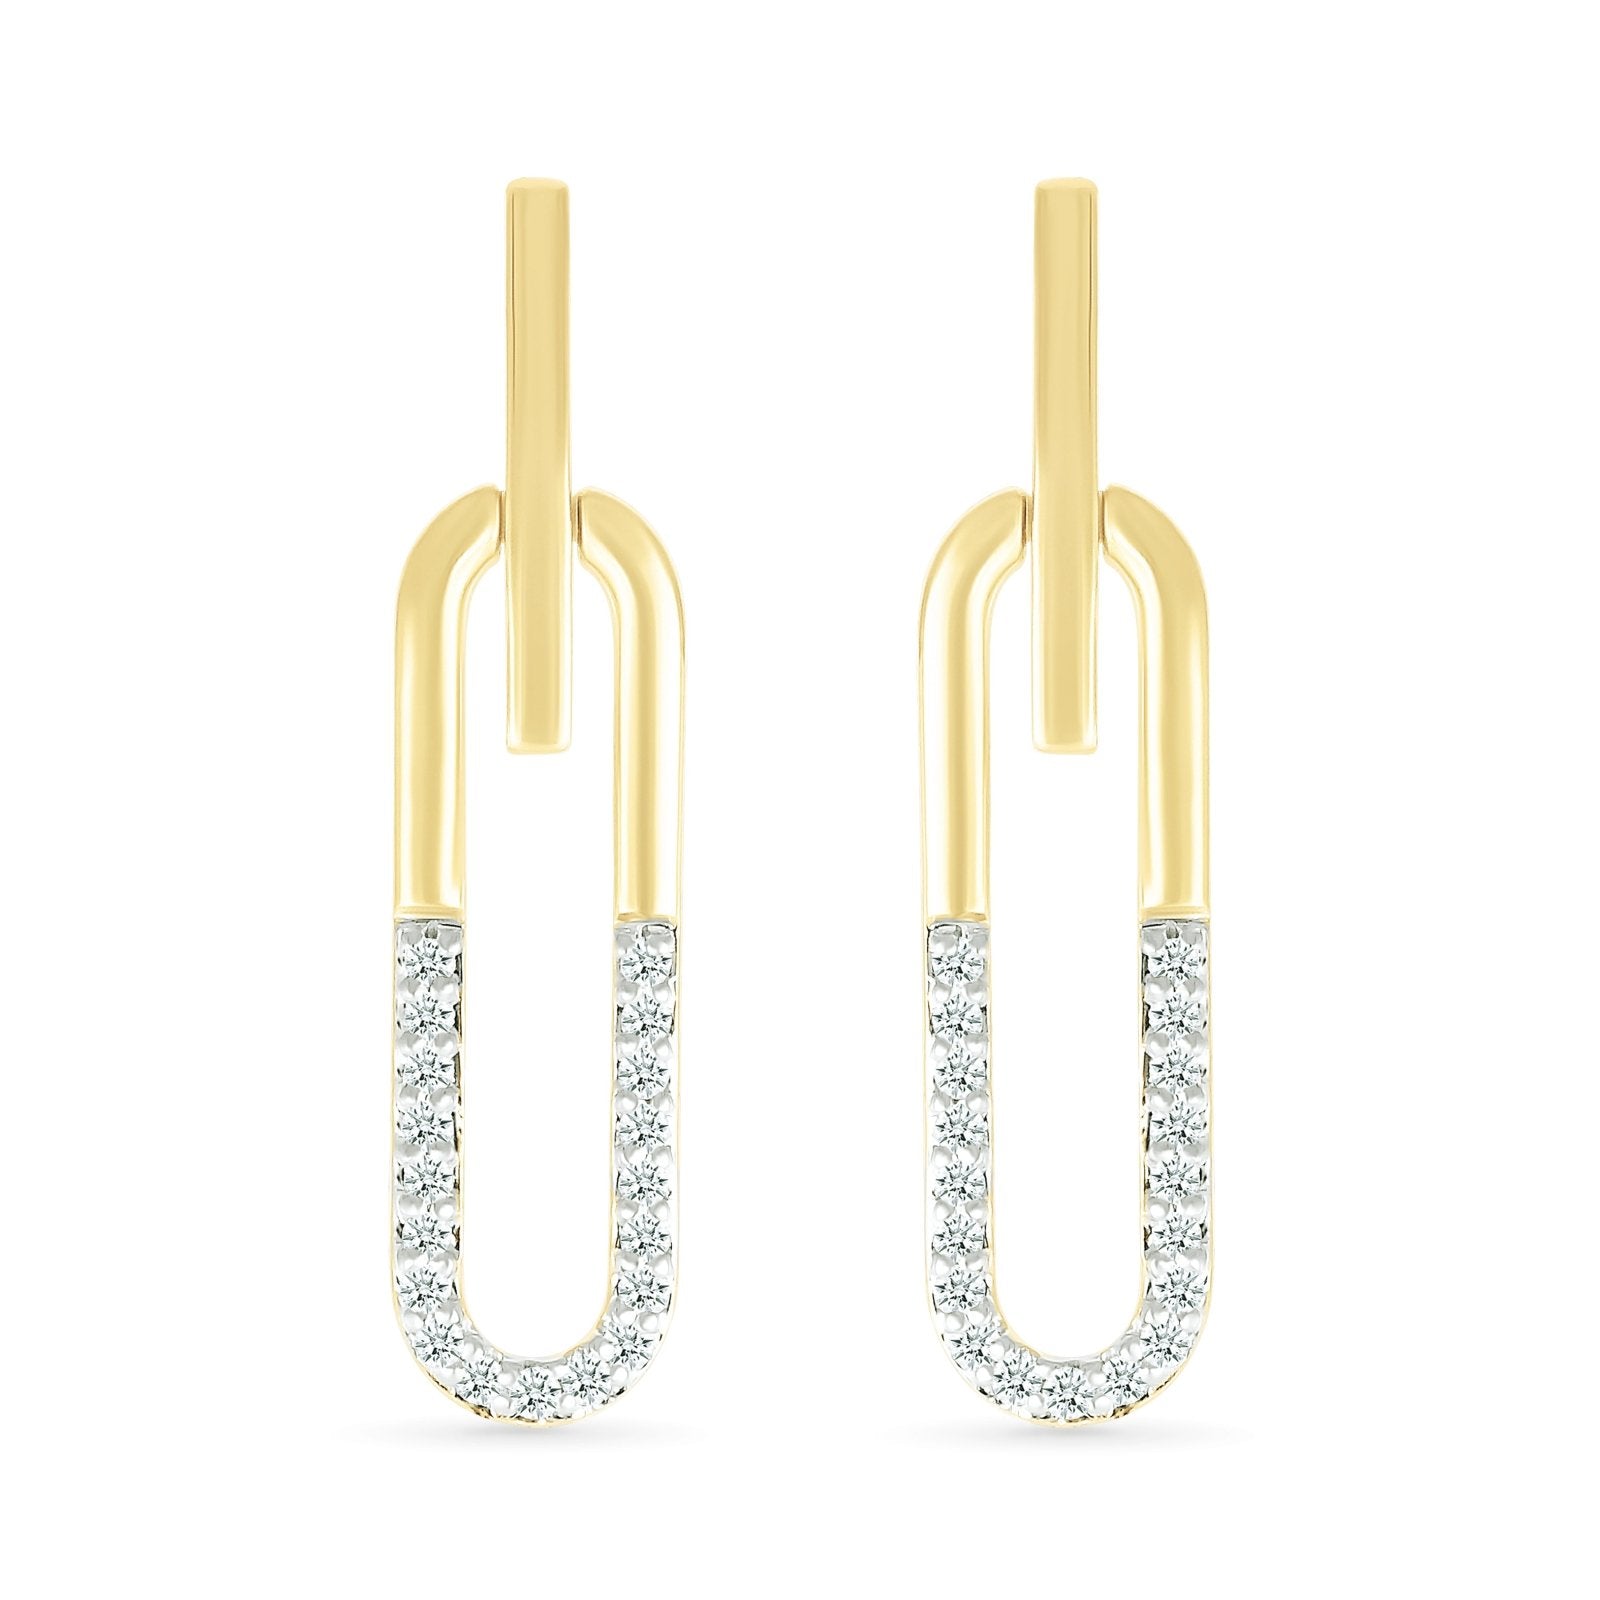 Dangling Paperclip Diamond Stud Earrings Earrings Estella Collection #product_description# 32665 Diamond Made to Order New Arrivals #tag4# #tag5# #tag6# #tag7# #tag8# #tag9# #tag10#